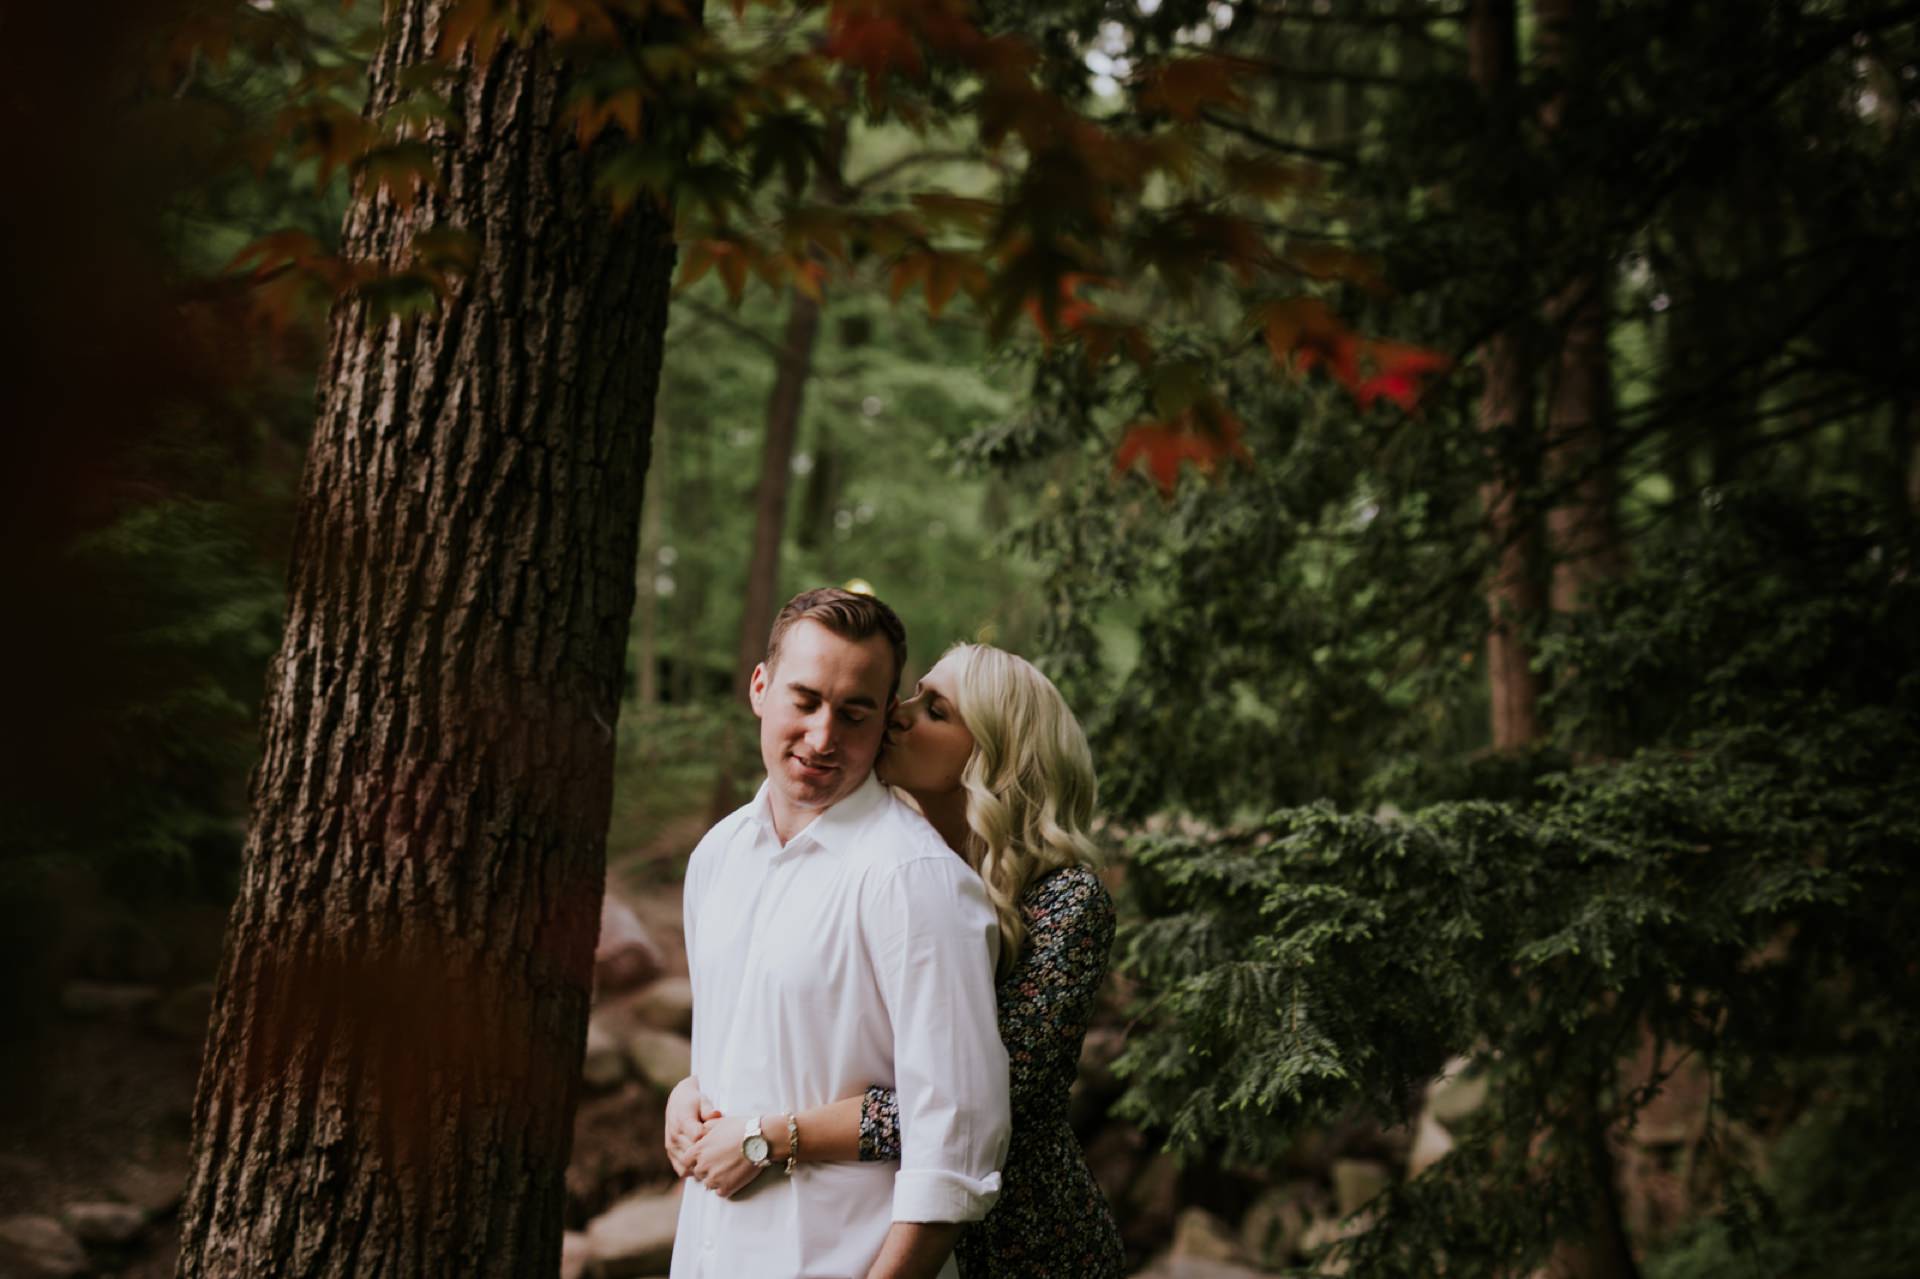 in the woods at this holcomb gardens engagements photos session a blonde woman kisses a brown haired man